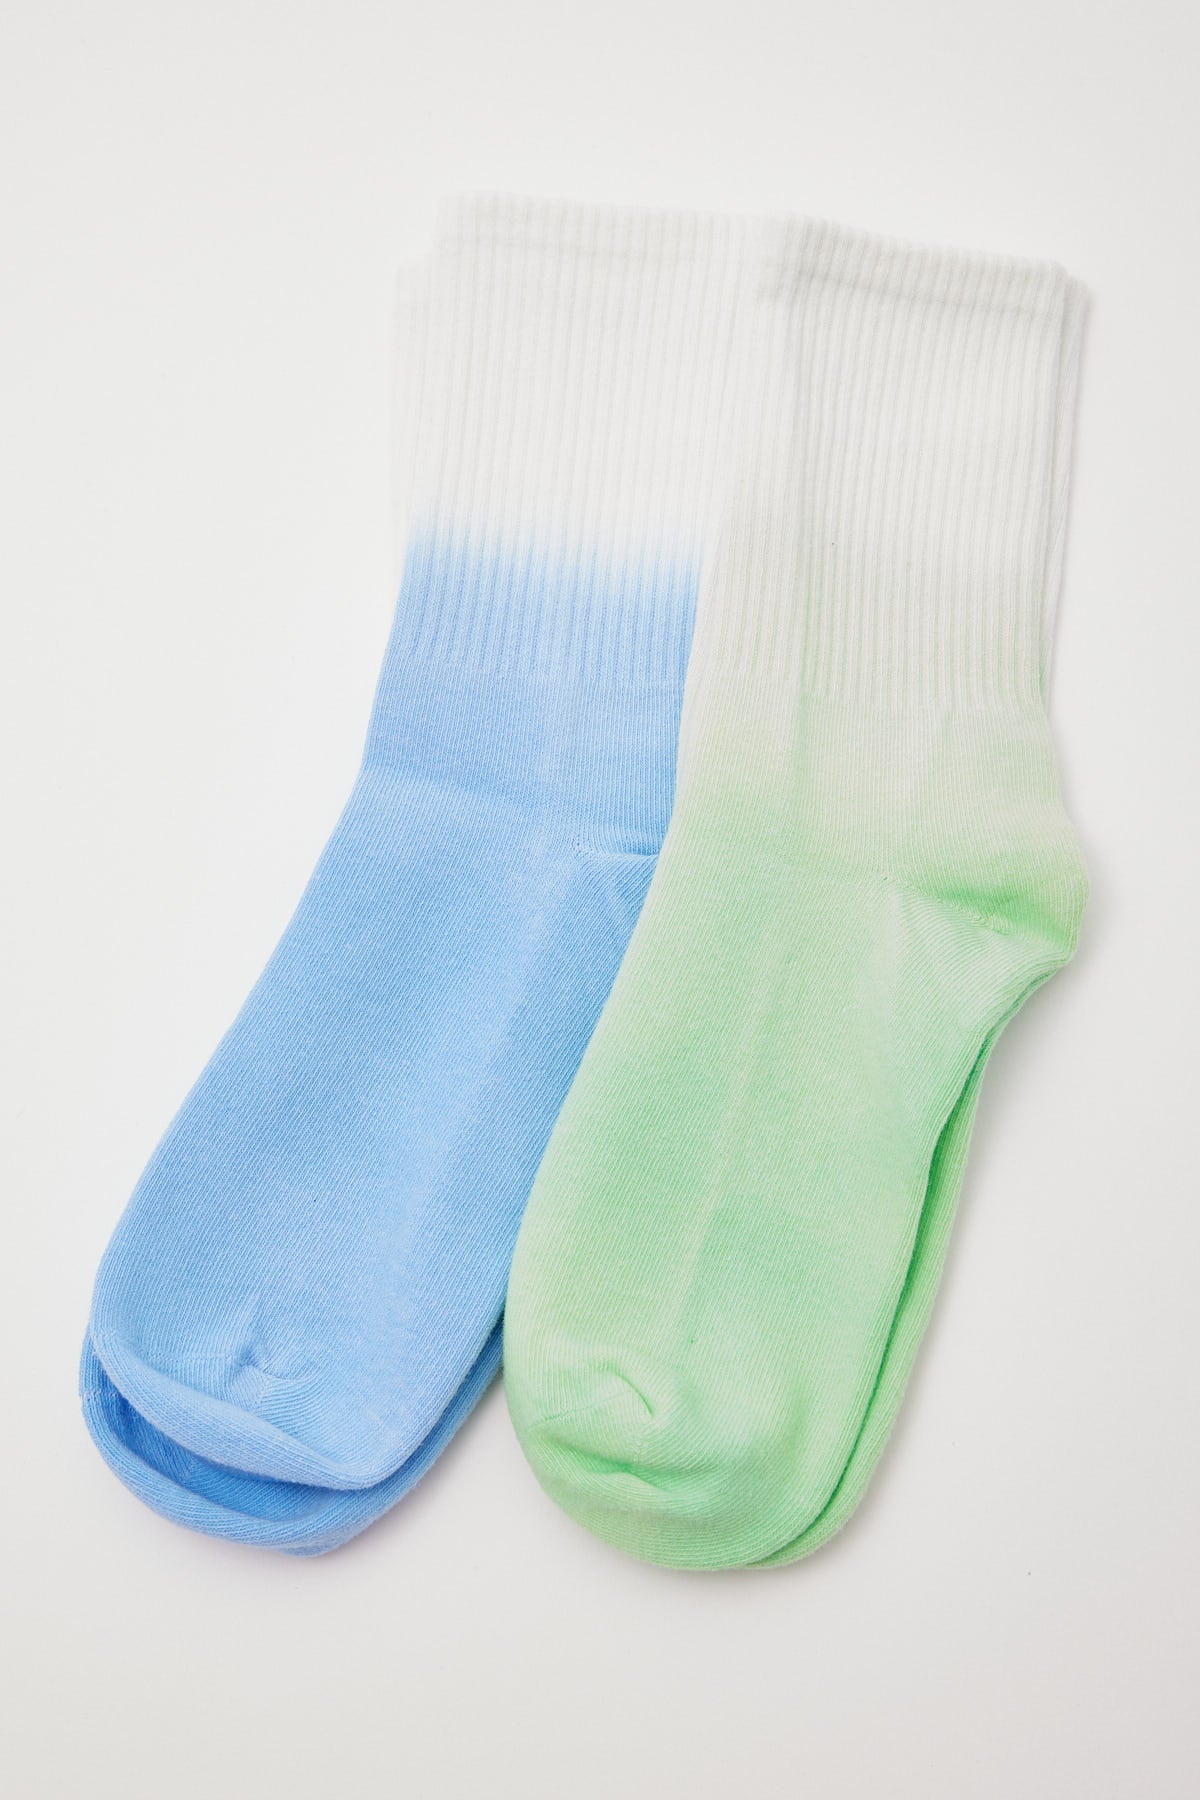 Luck & Trouble Ombre Sock 2 Pack Blue Print/Green Print